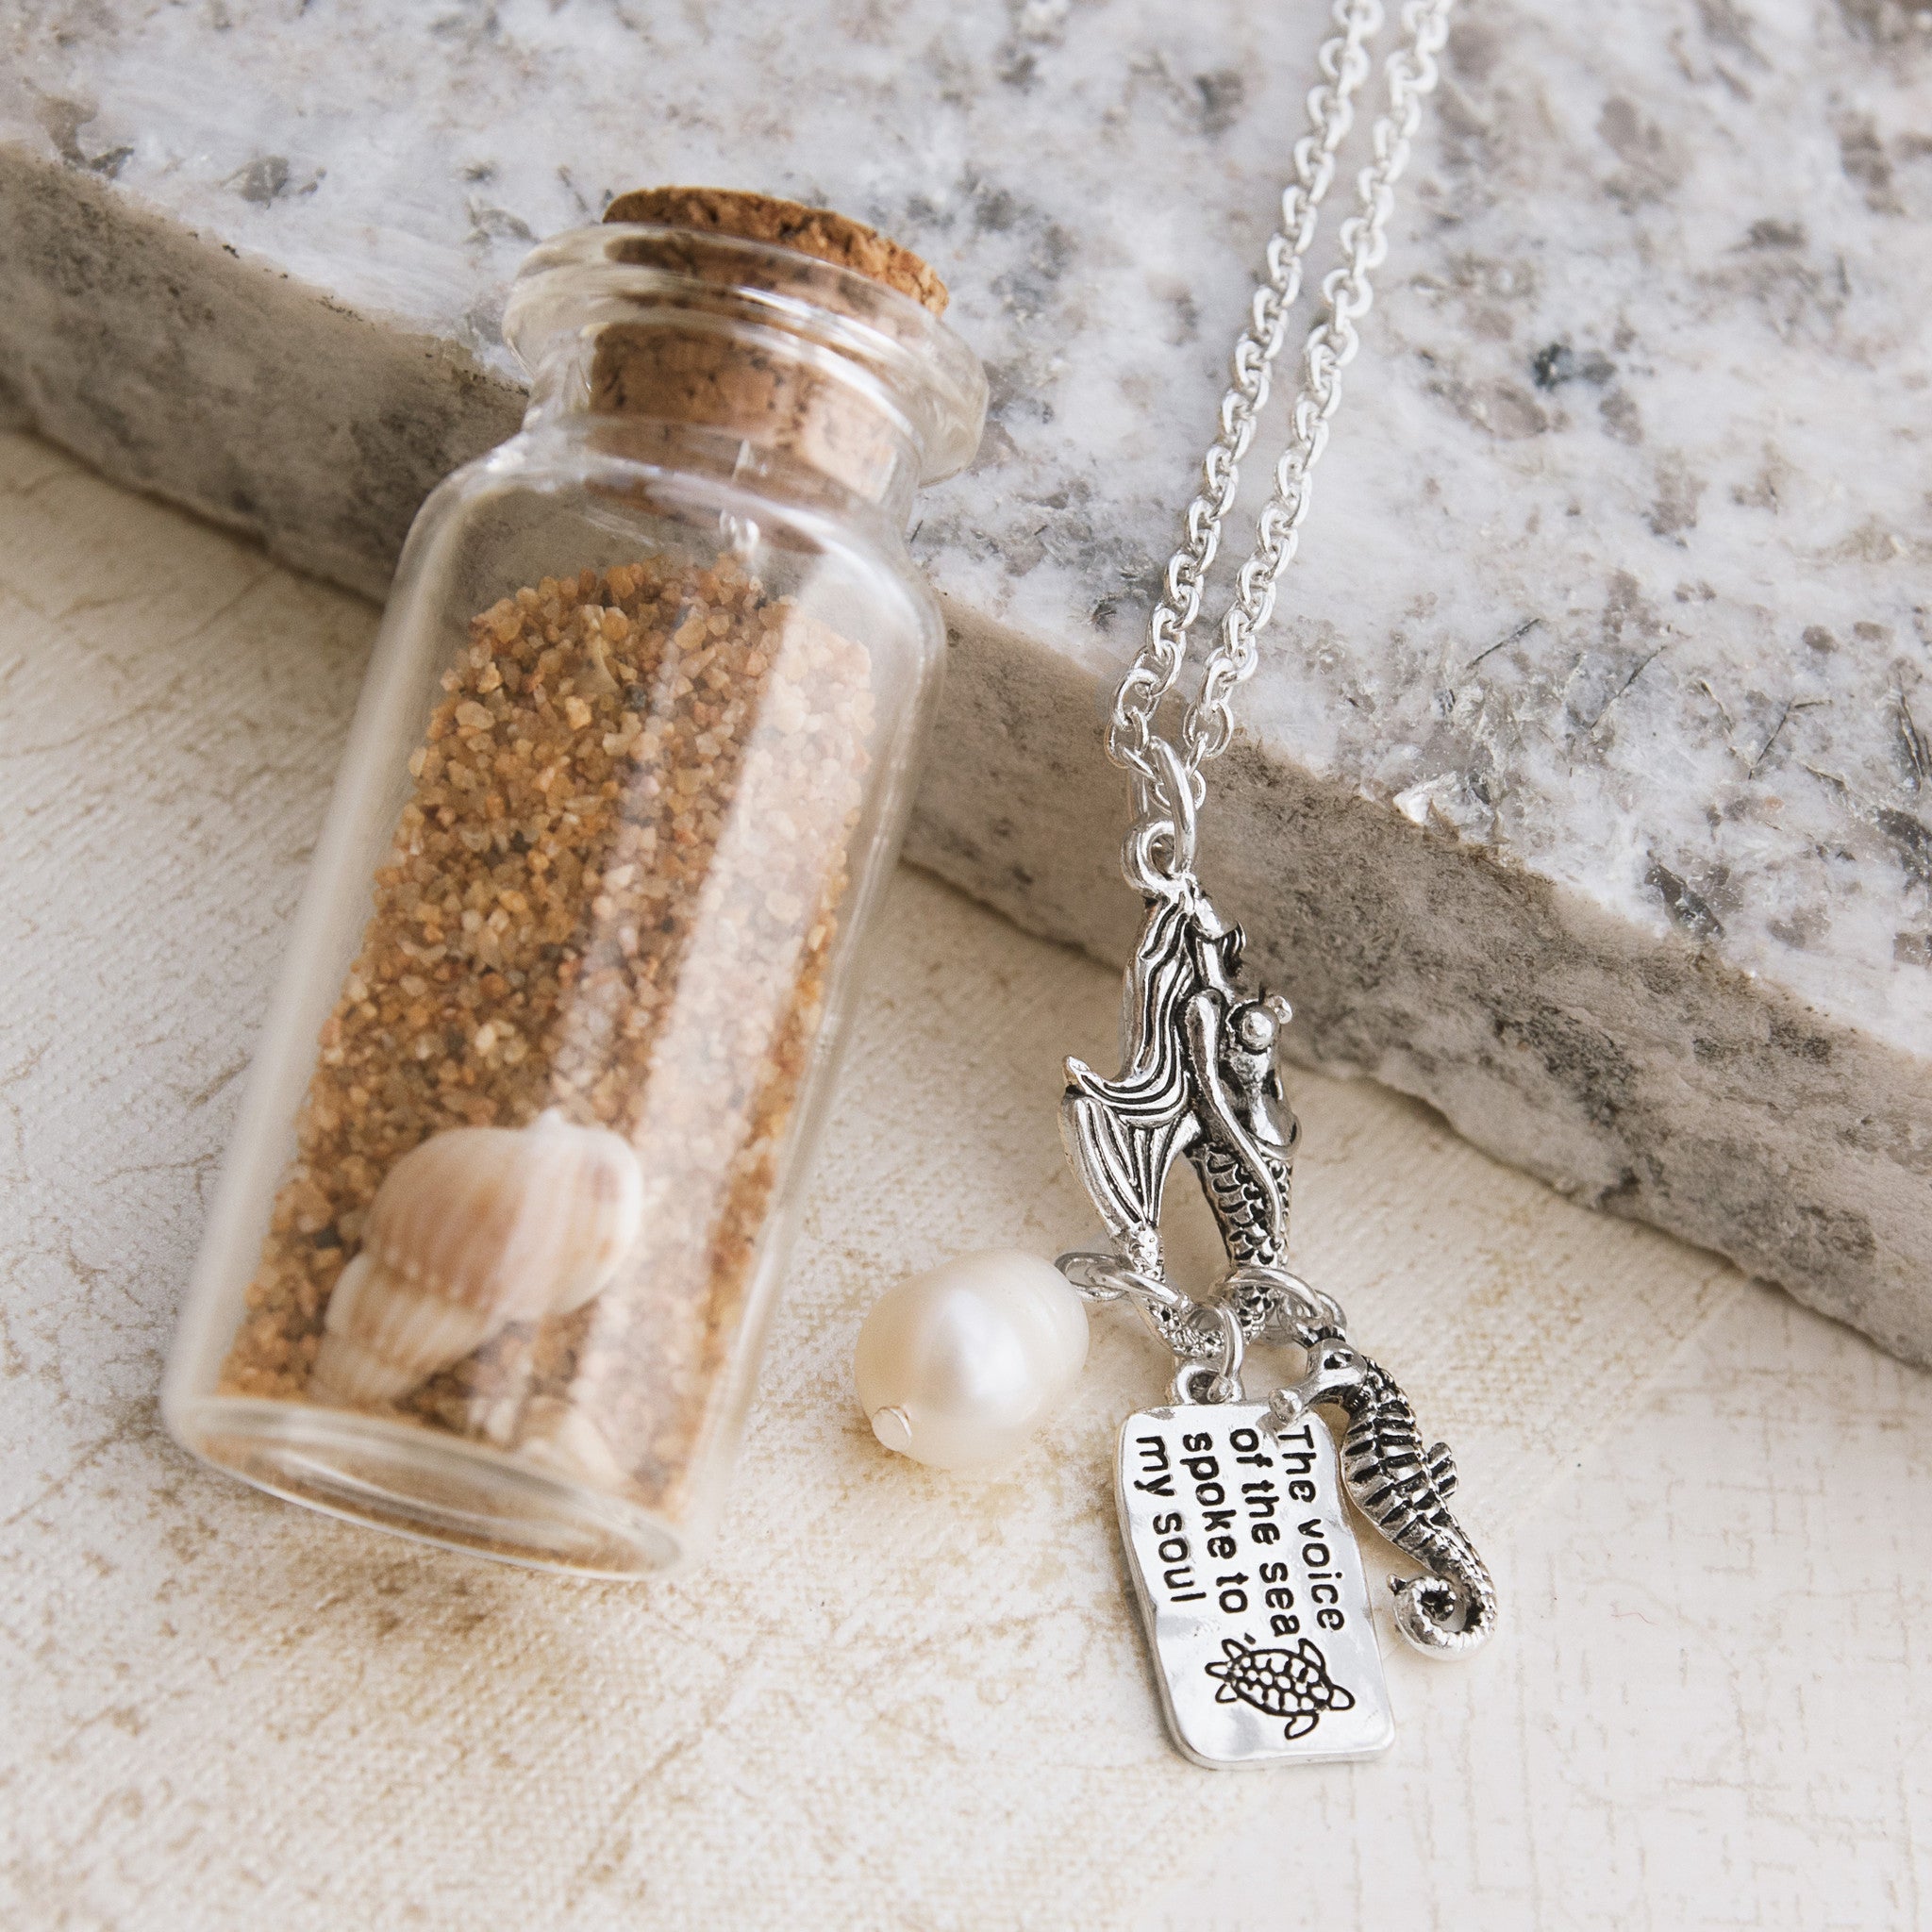 Mermaids and Seashells Necklace In a Jar - pipercleo.com